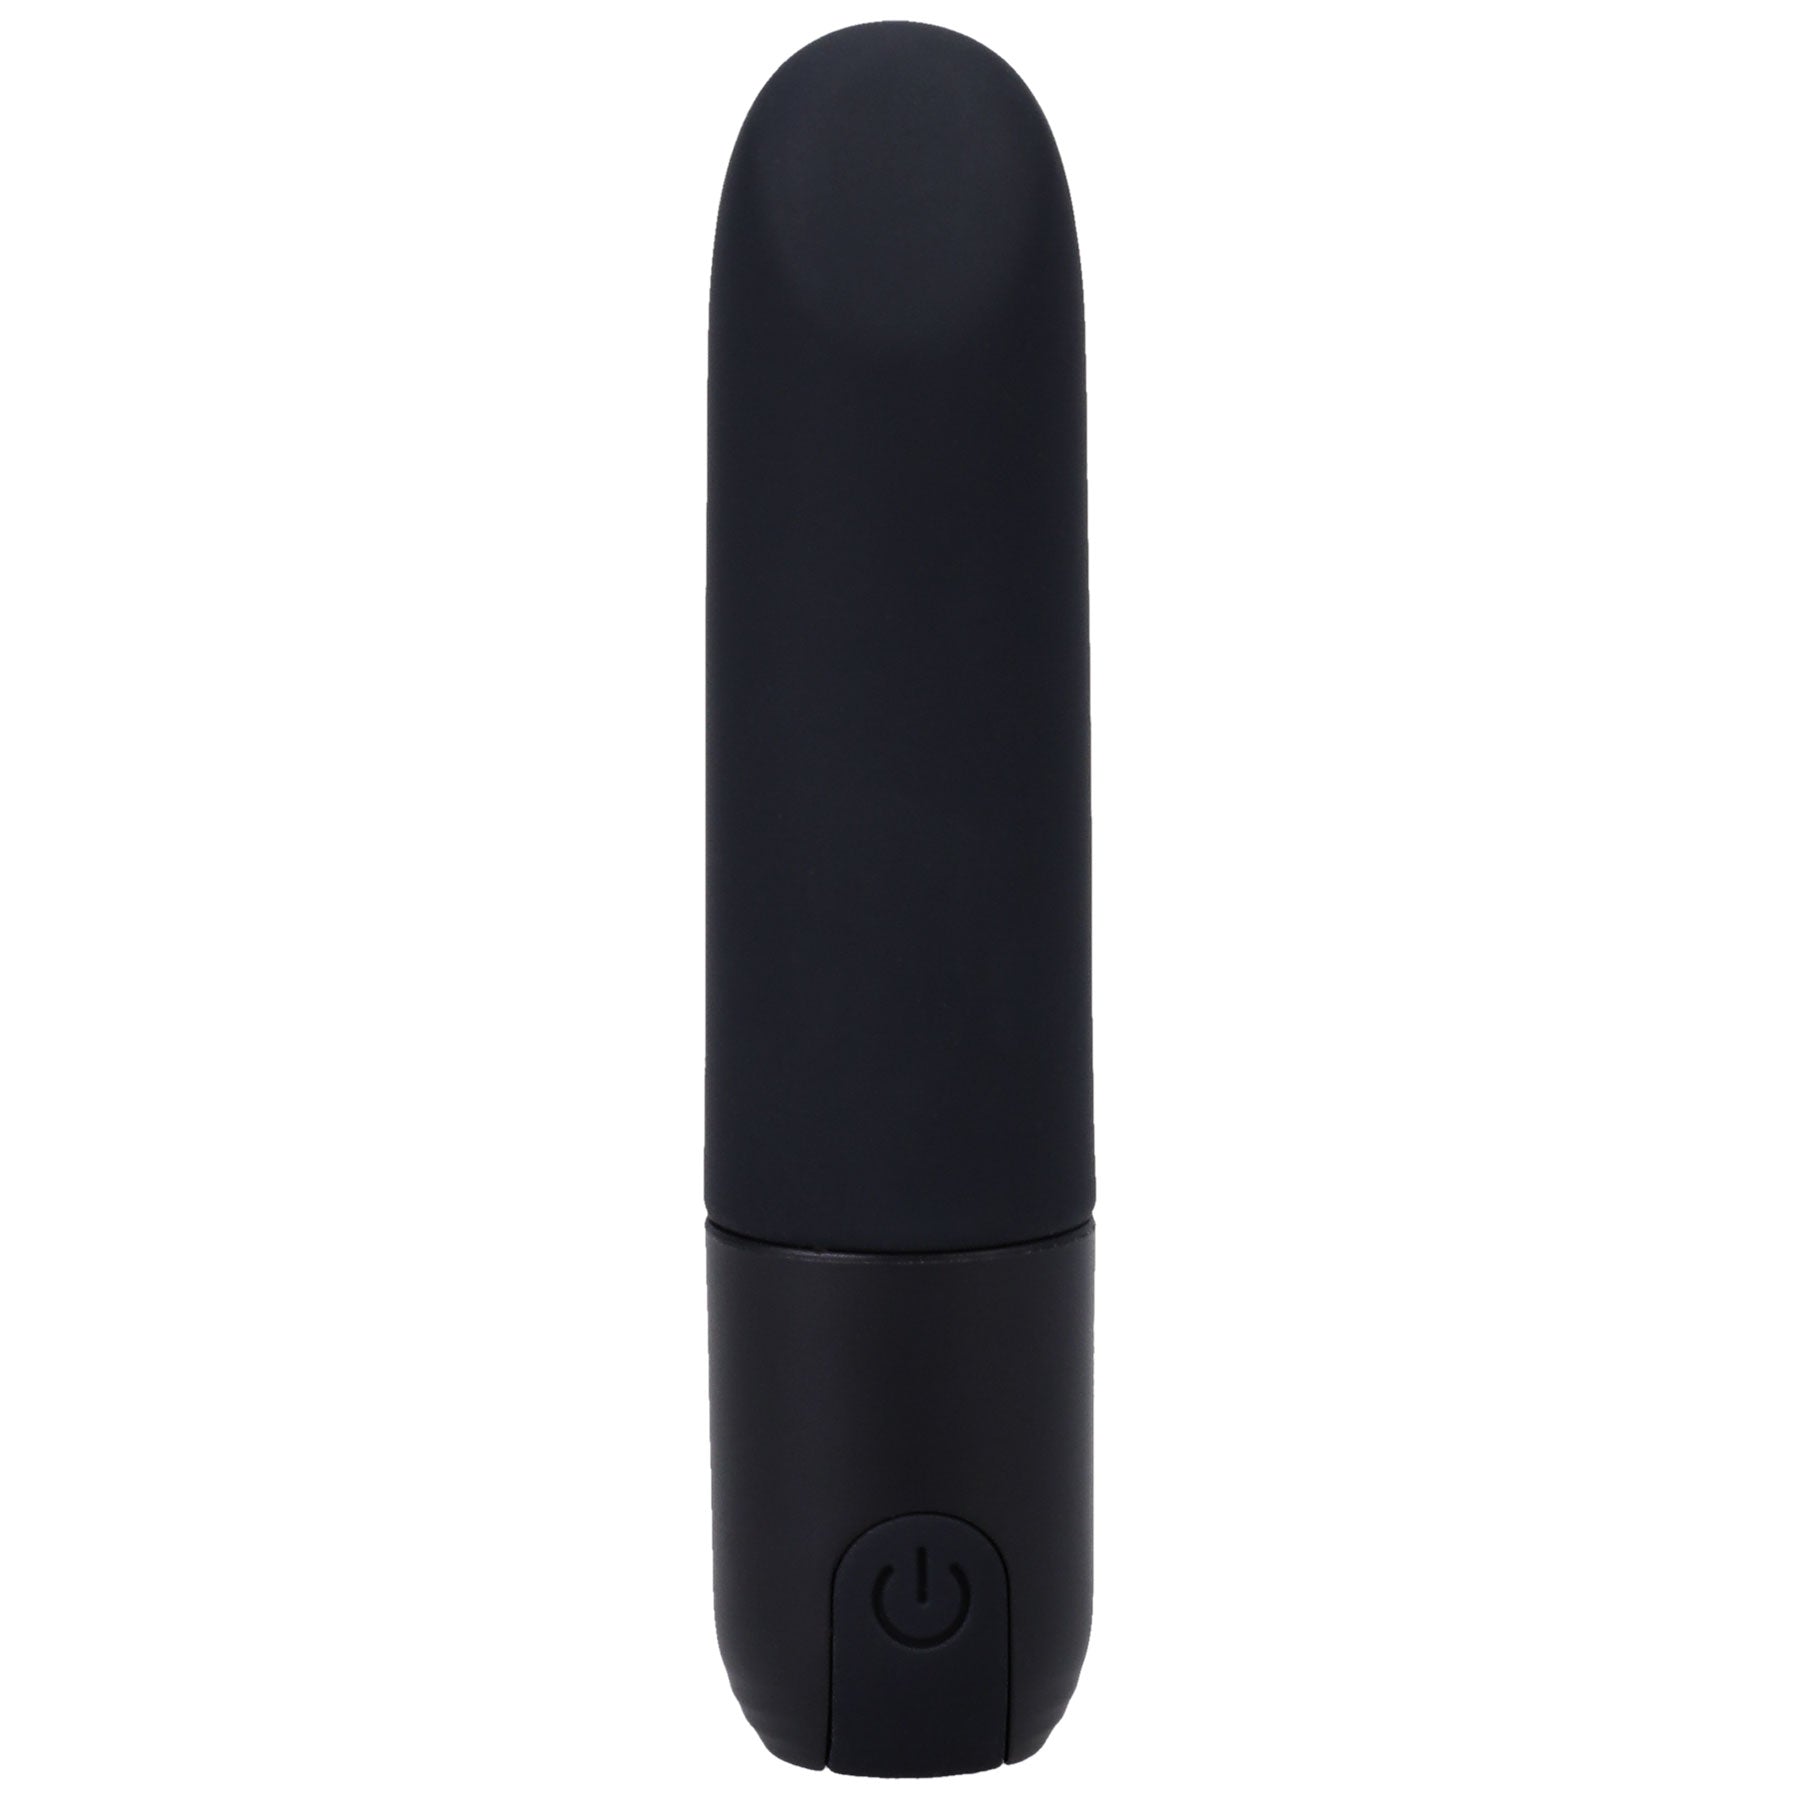 Pulsating Patterns With Bullet Vibrator in a Bag - Black